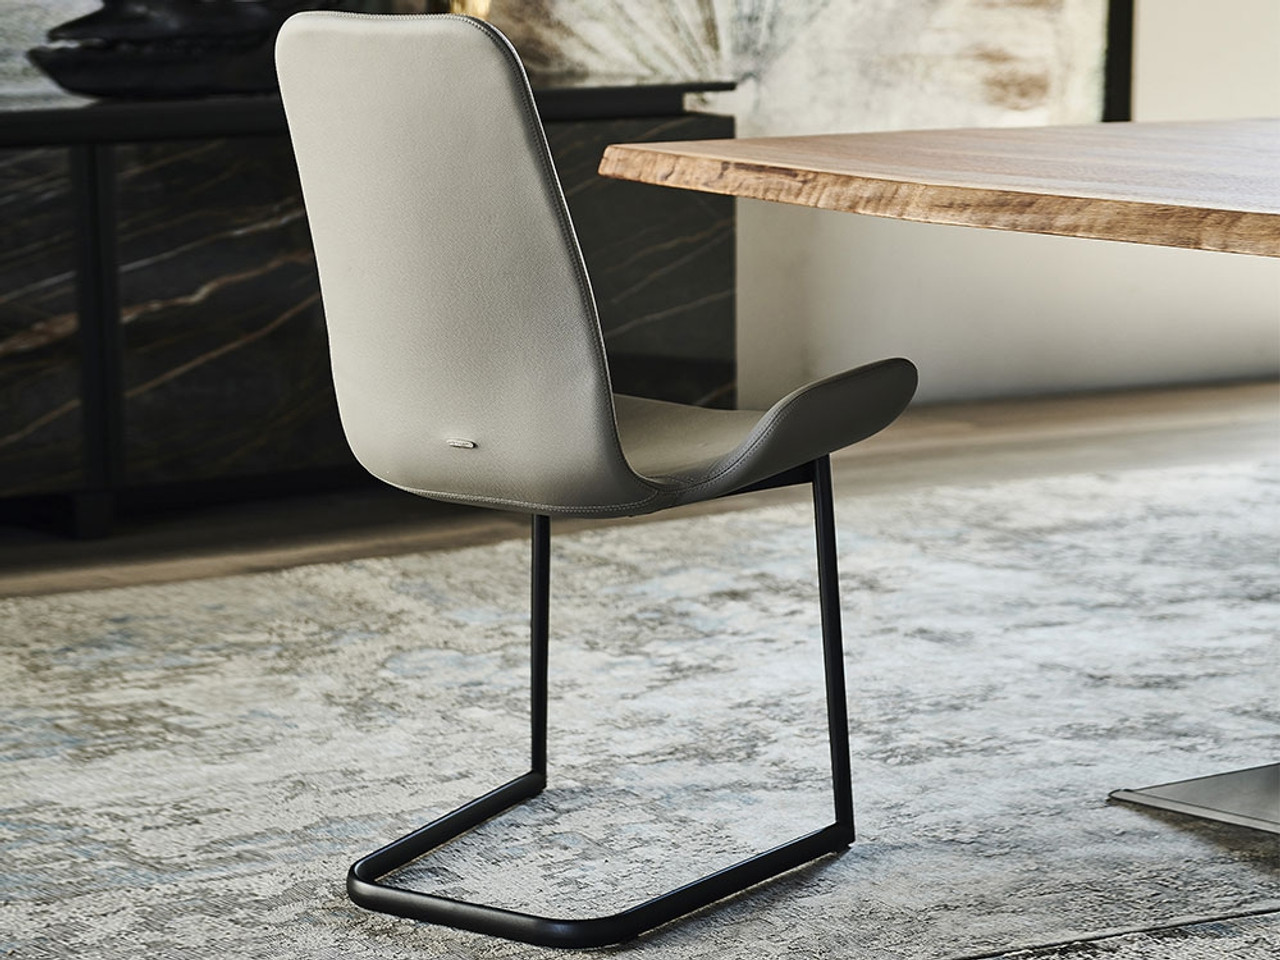 Cattelan Italia Flamingo Dining Chair - Cantilever by Paolo Cattelan